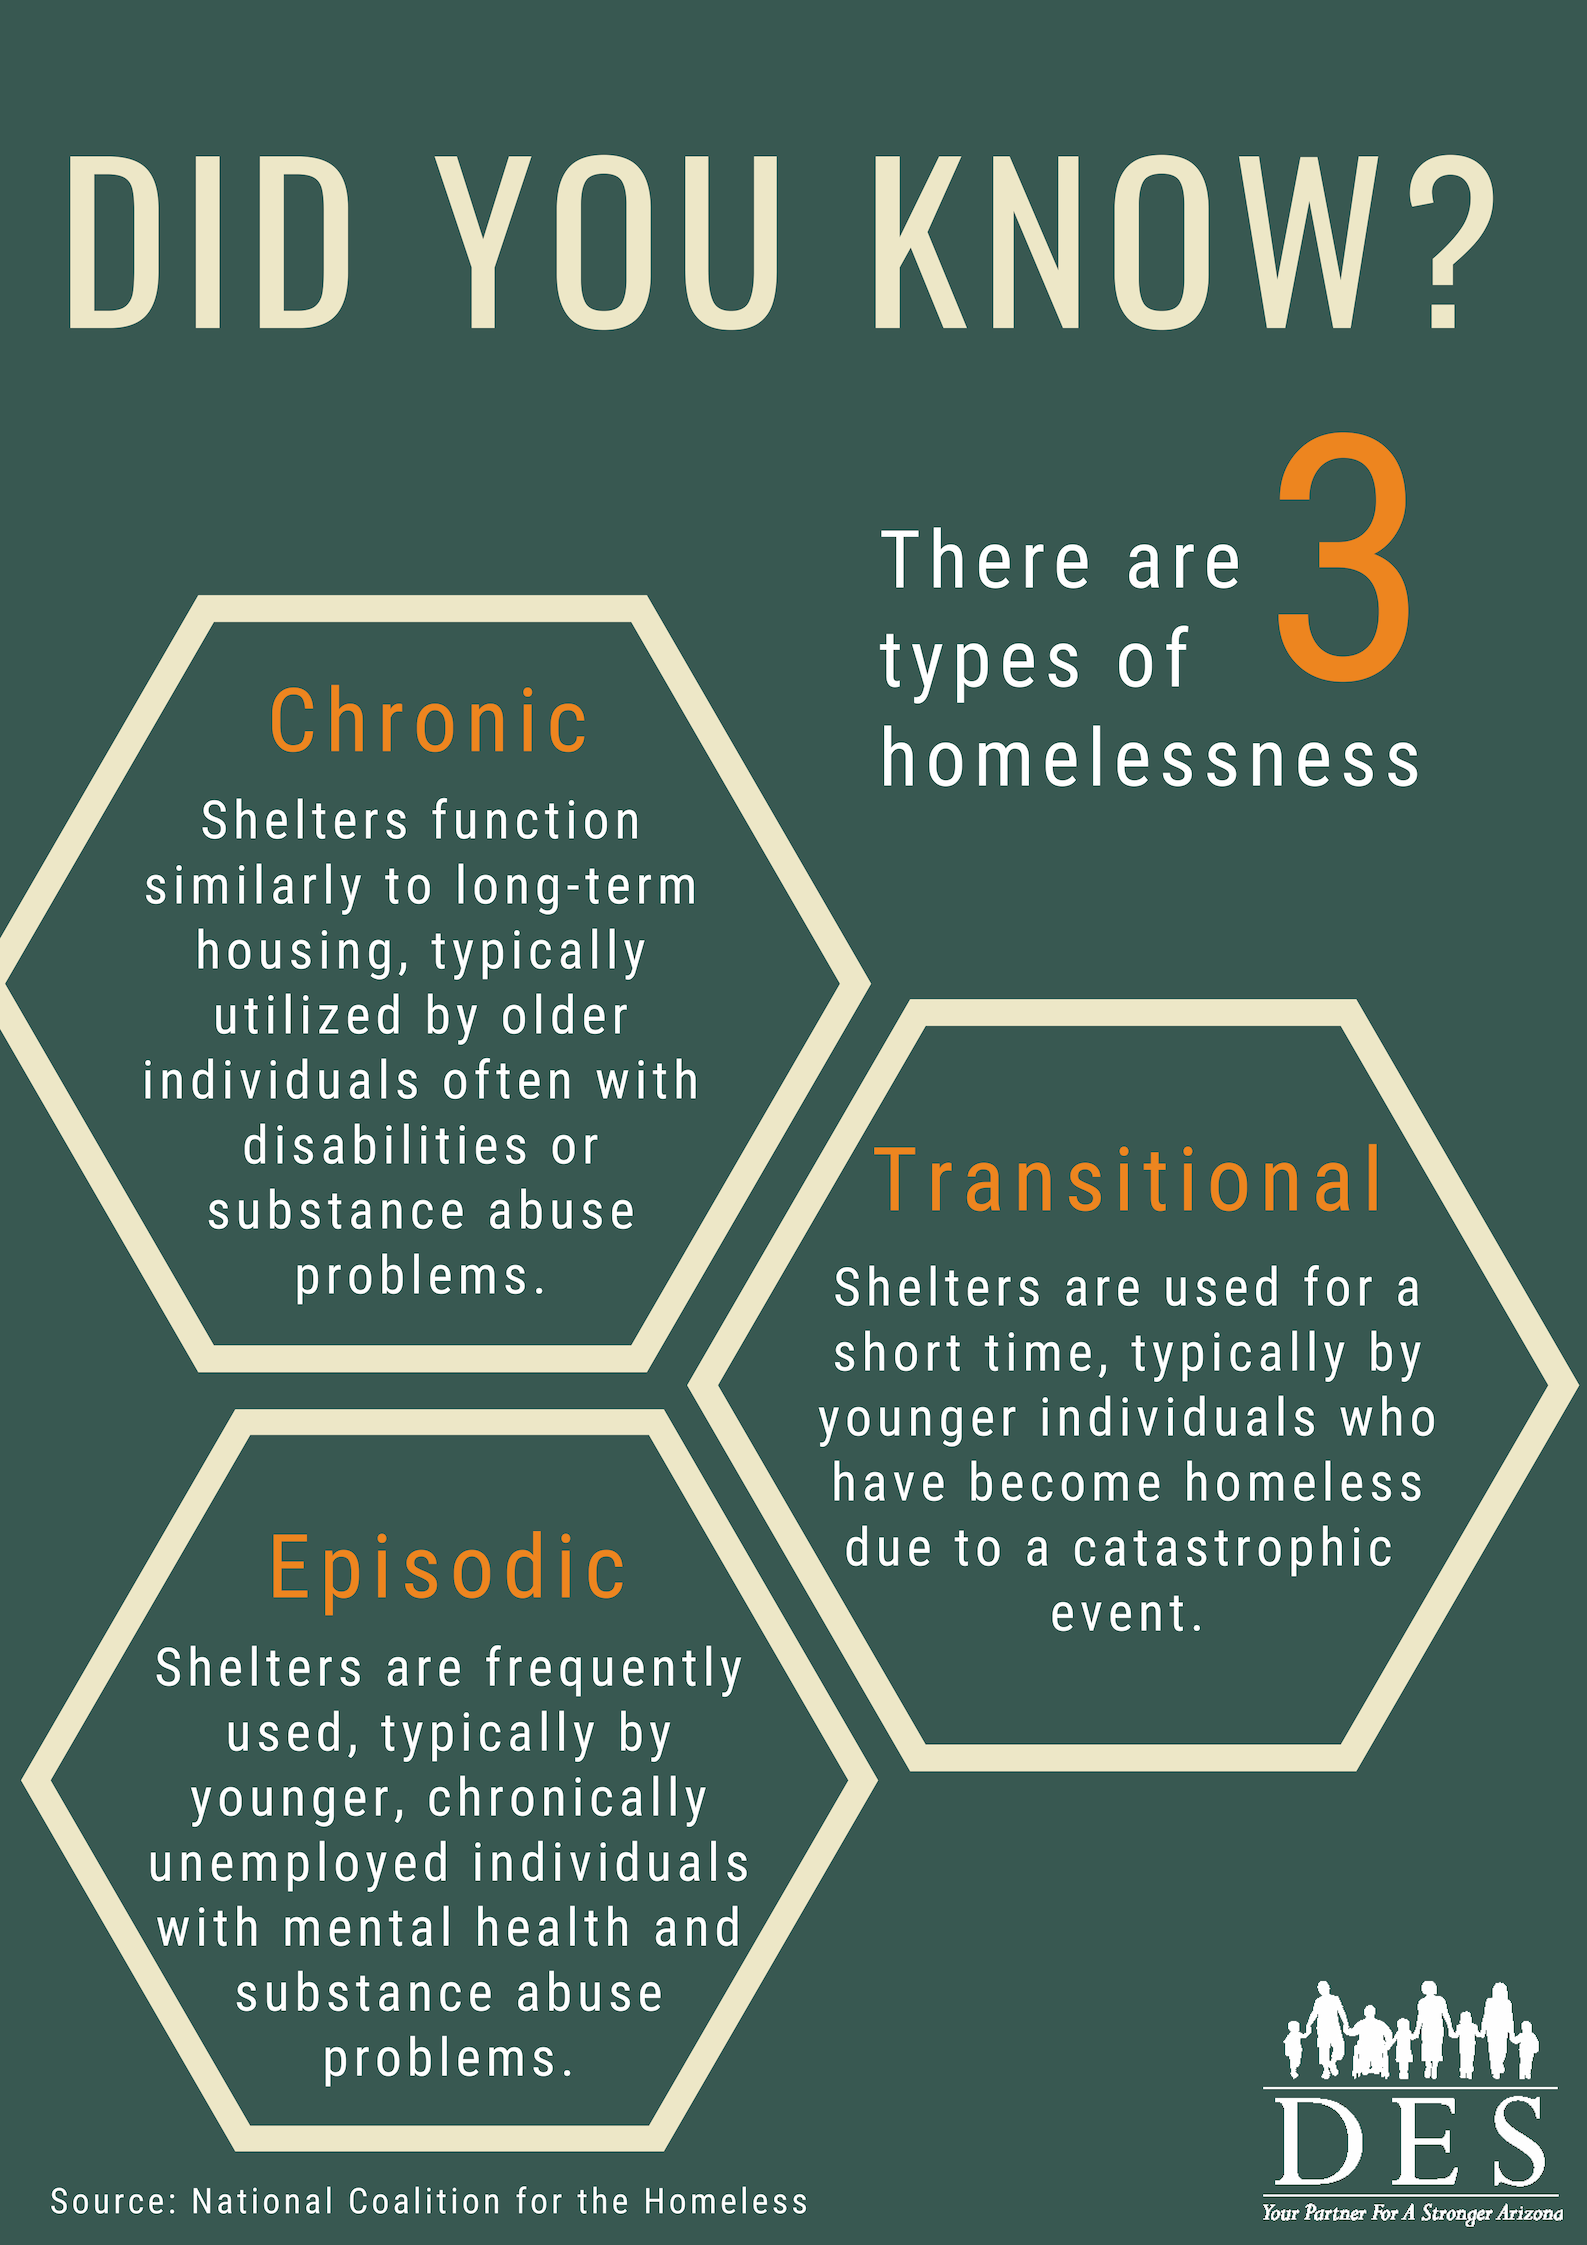 Information of the 3 types of homelessness